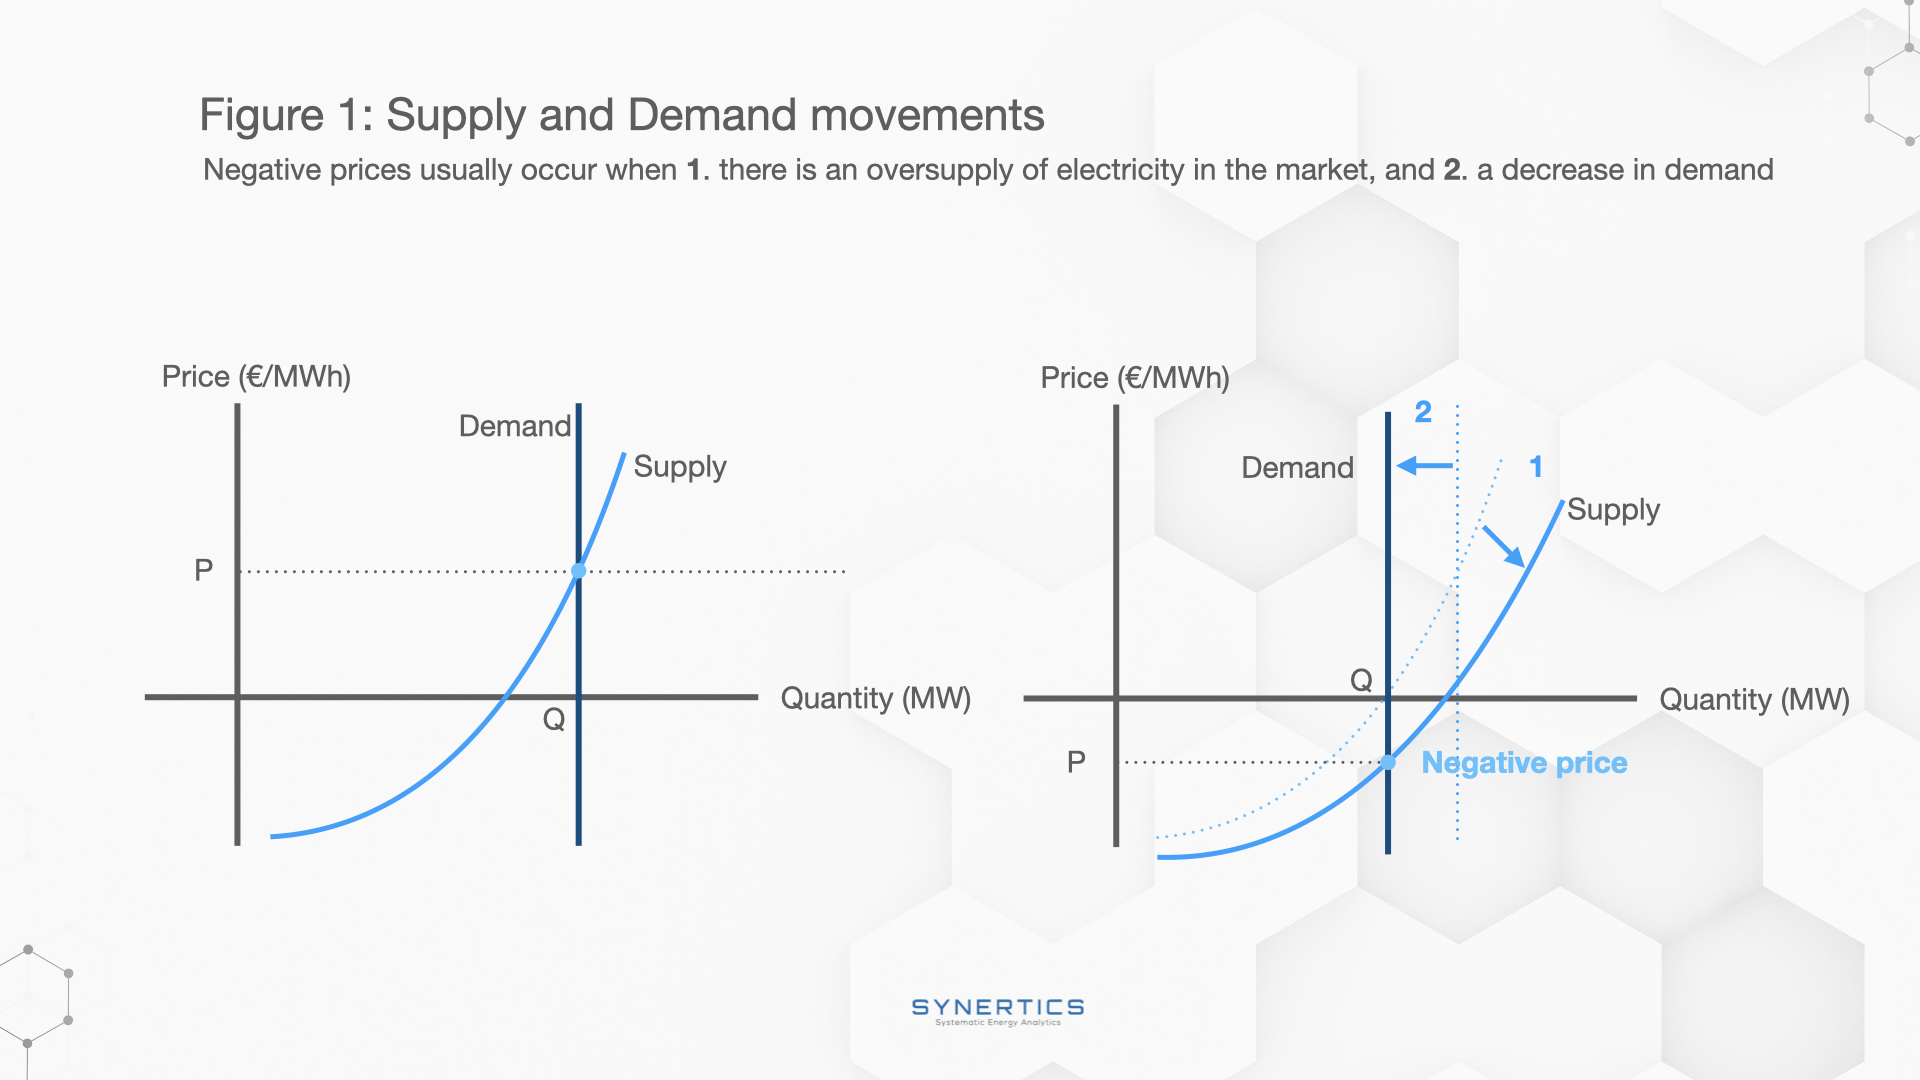 Supply and Demand movements - Negative Prices